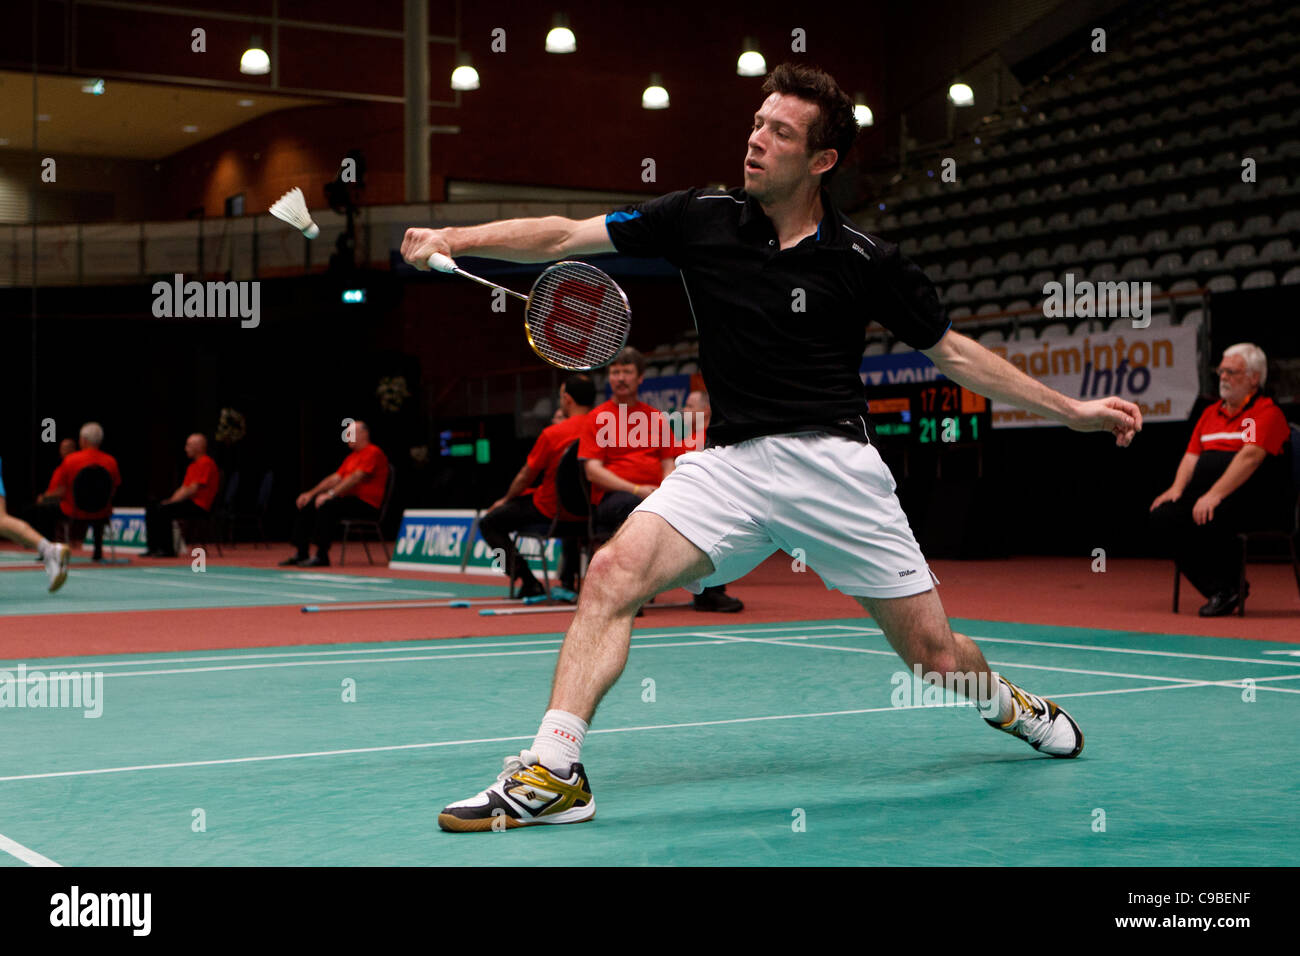 Badminton player Carl Baxter from England Stock Photo